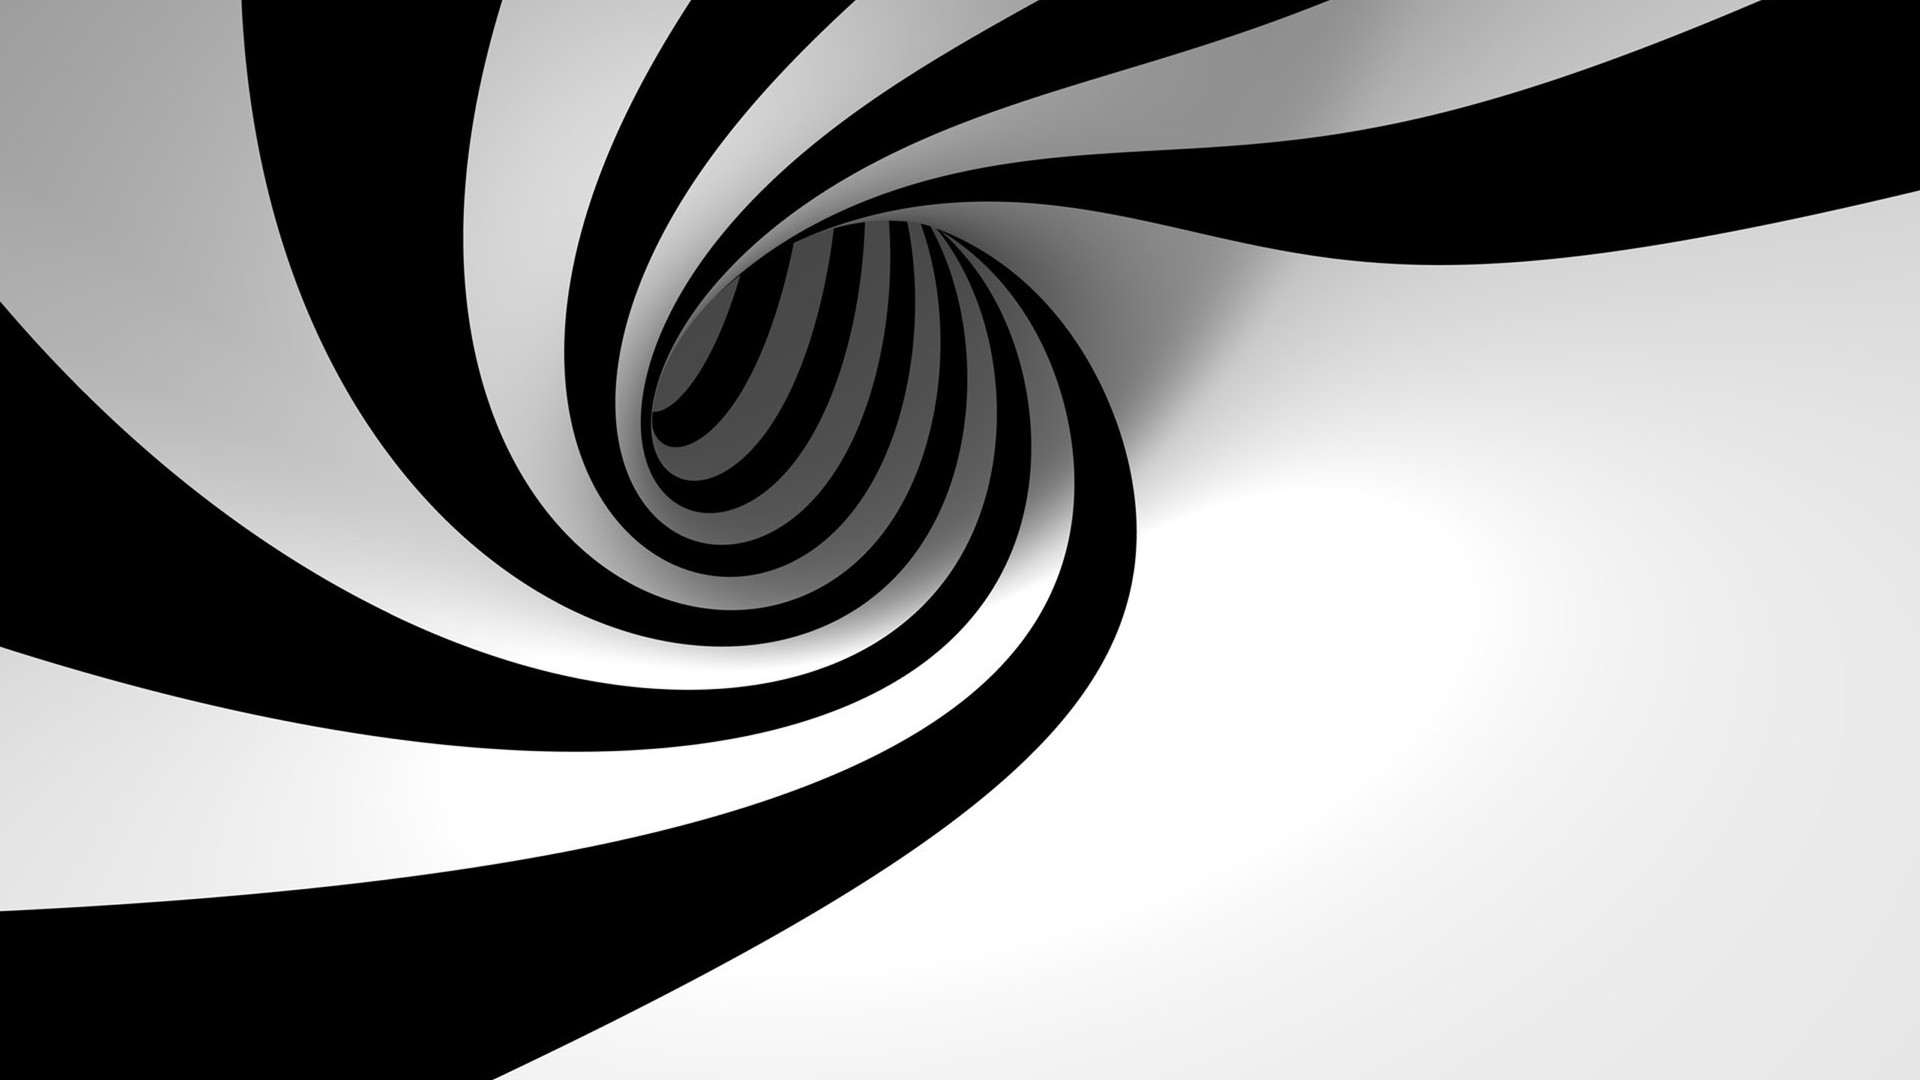 black-and-white-whirl-abstract-wallpaper-1920×1080-147.jpg